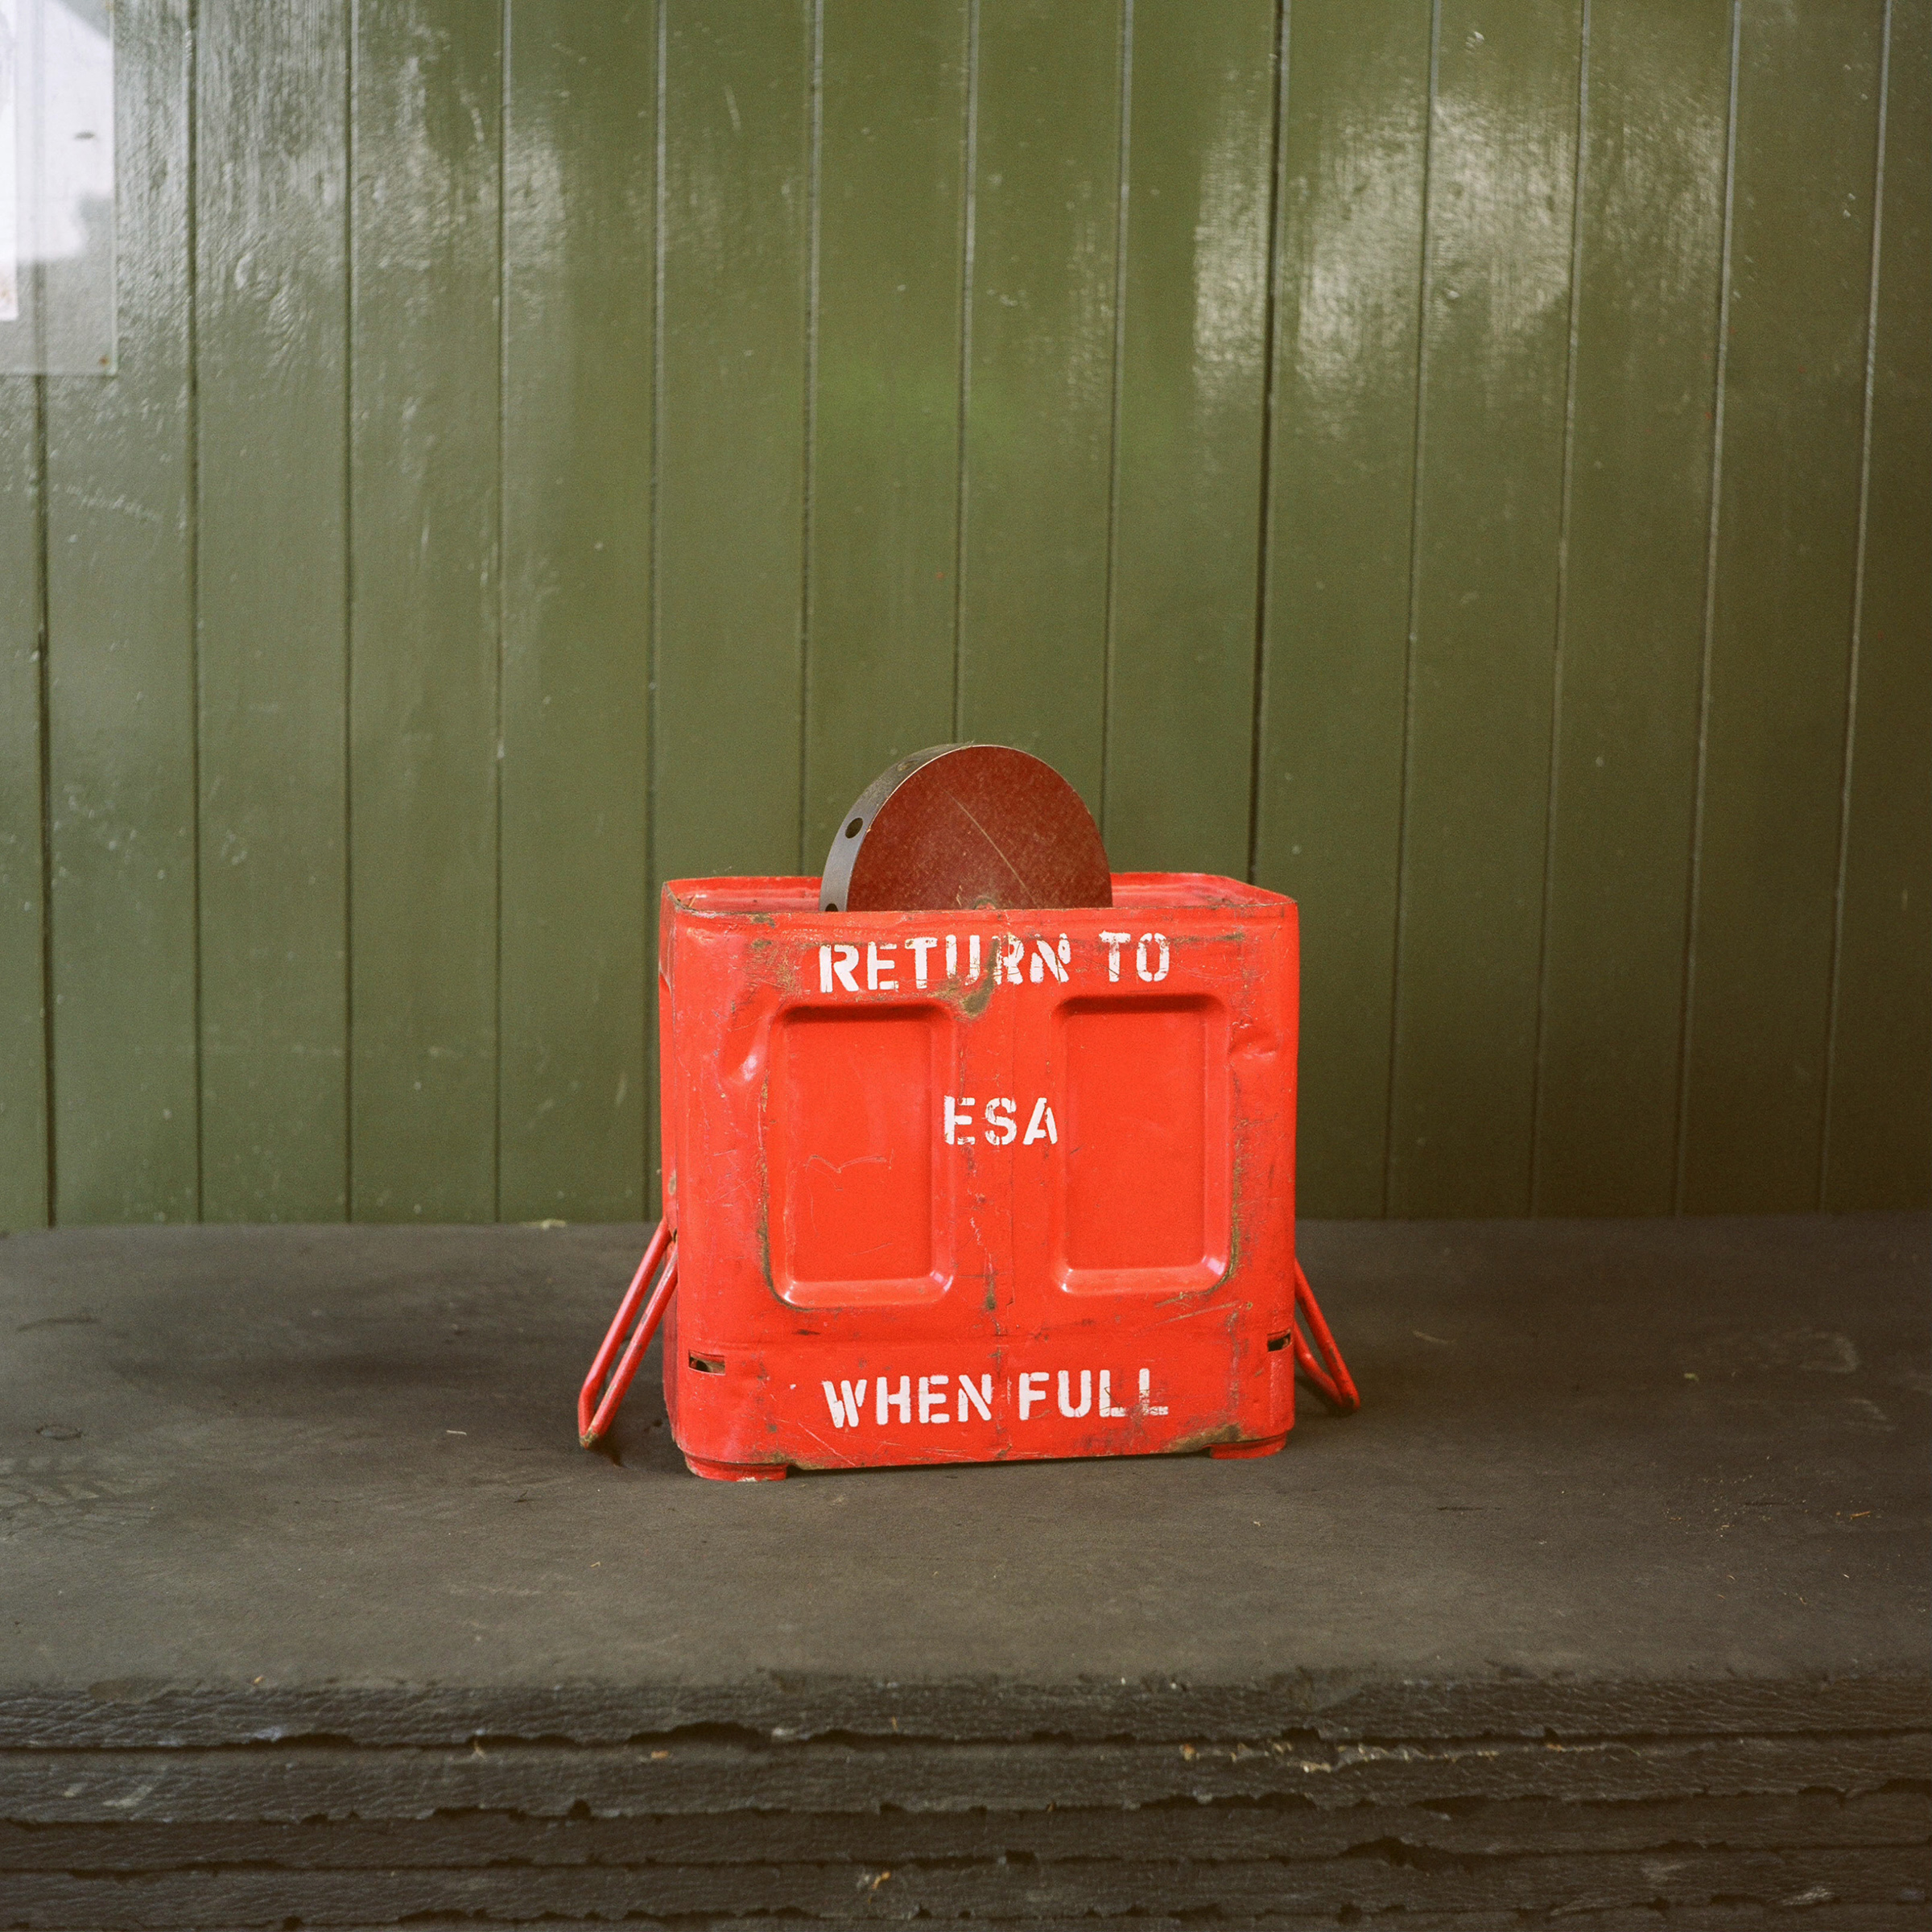 Red metal case in front of green painted wood panelling